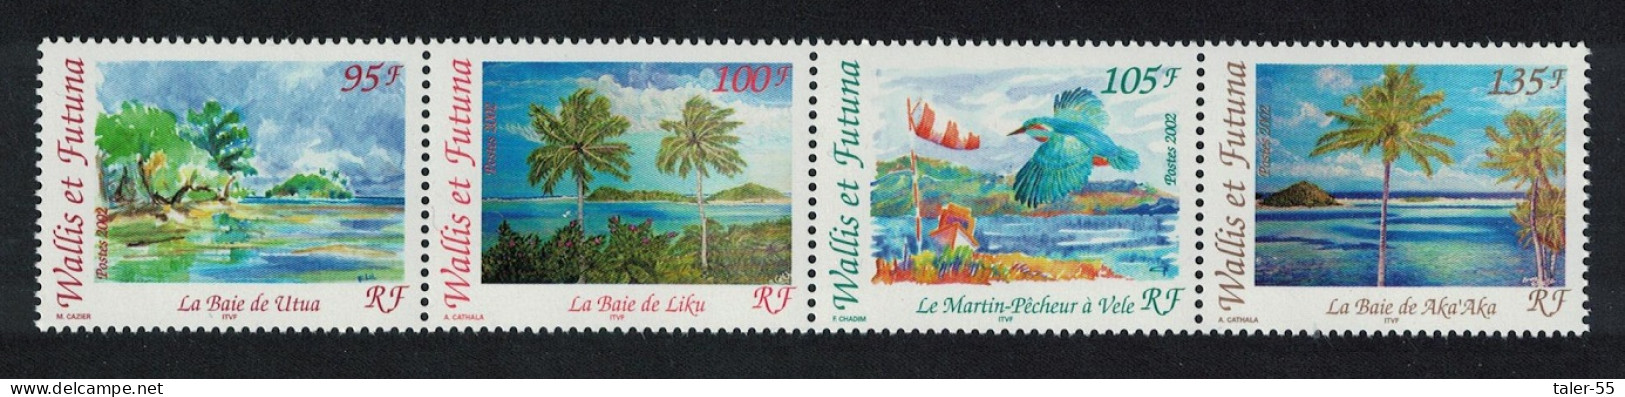 Wallis And Futuna Kingfisher Birds Landscapes Strip Of 4v 2002 MNH SG#807-810 Sc#559 - Unused Stamps